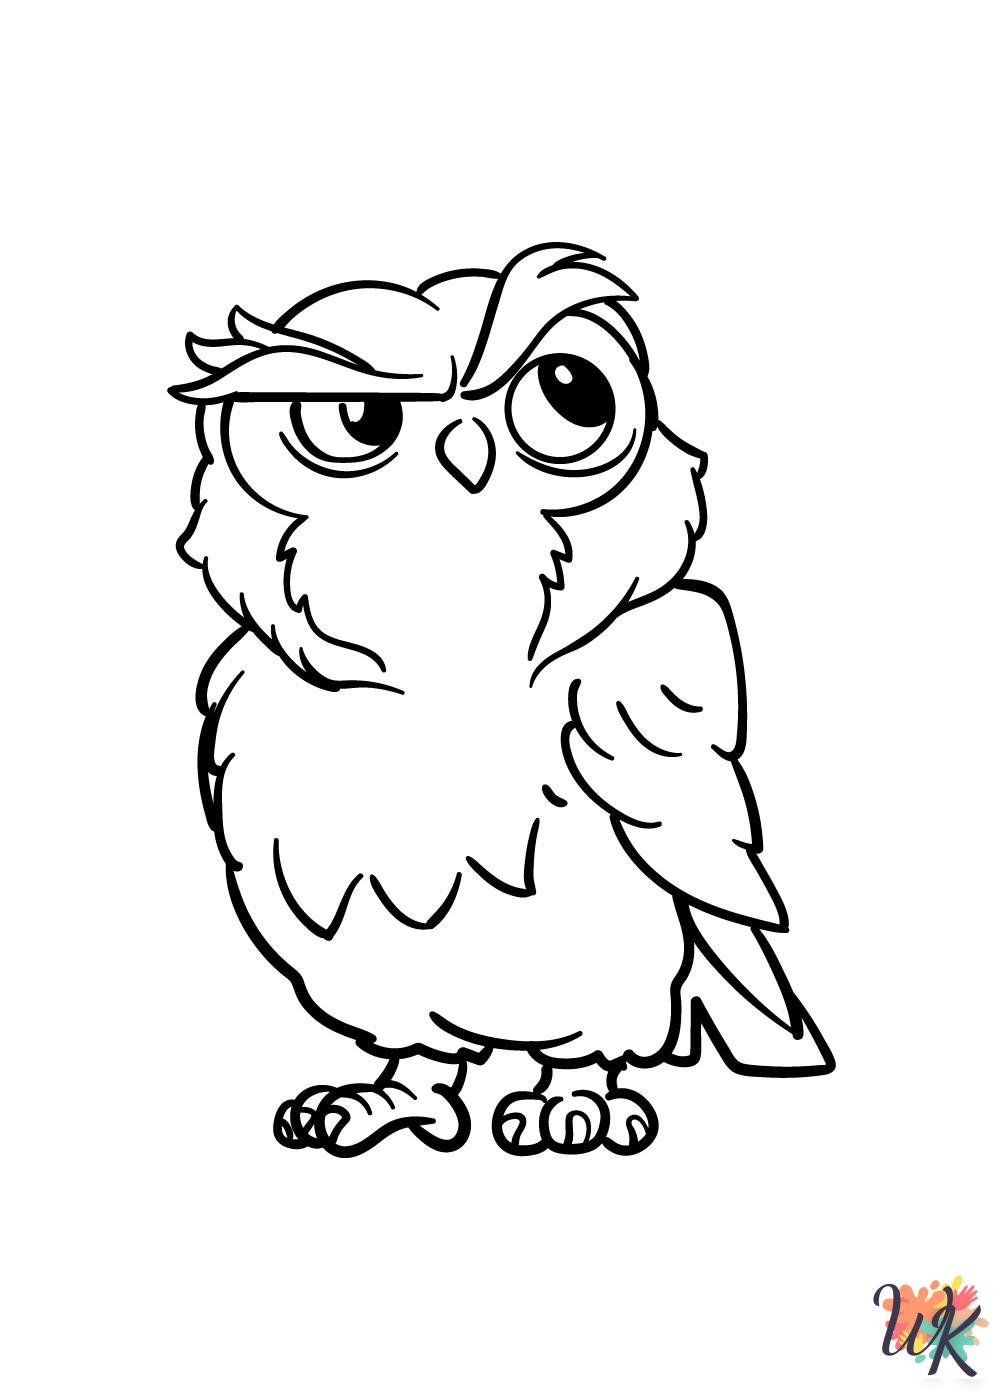 Owl coloring pages grinch